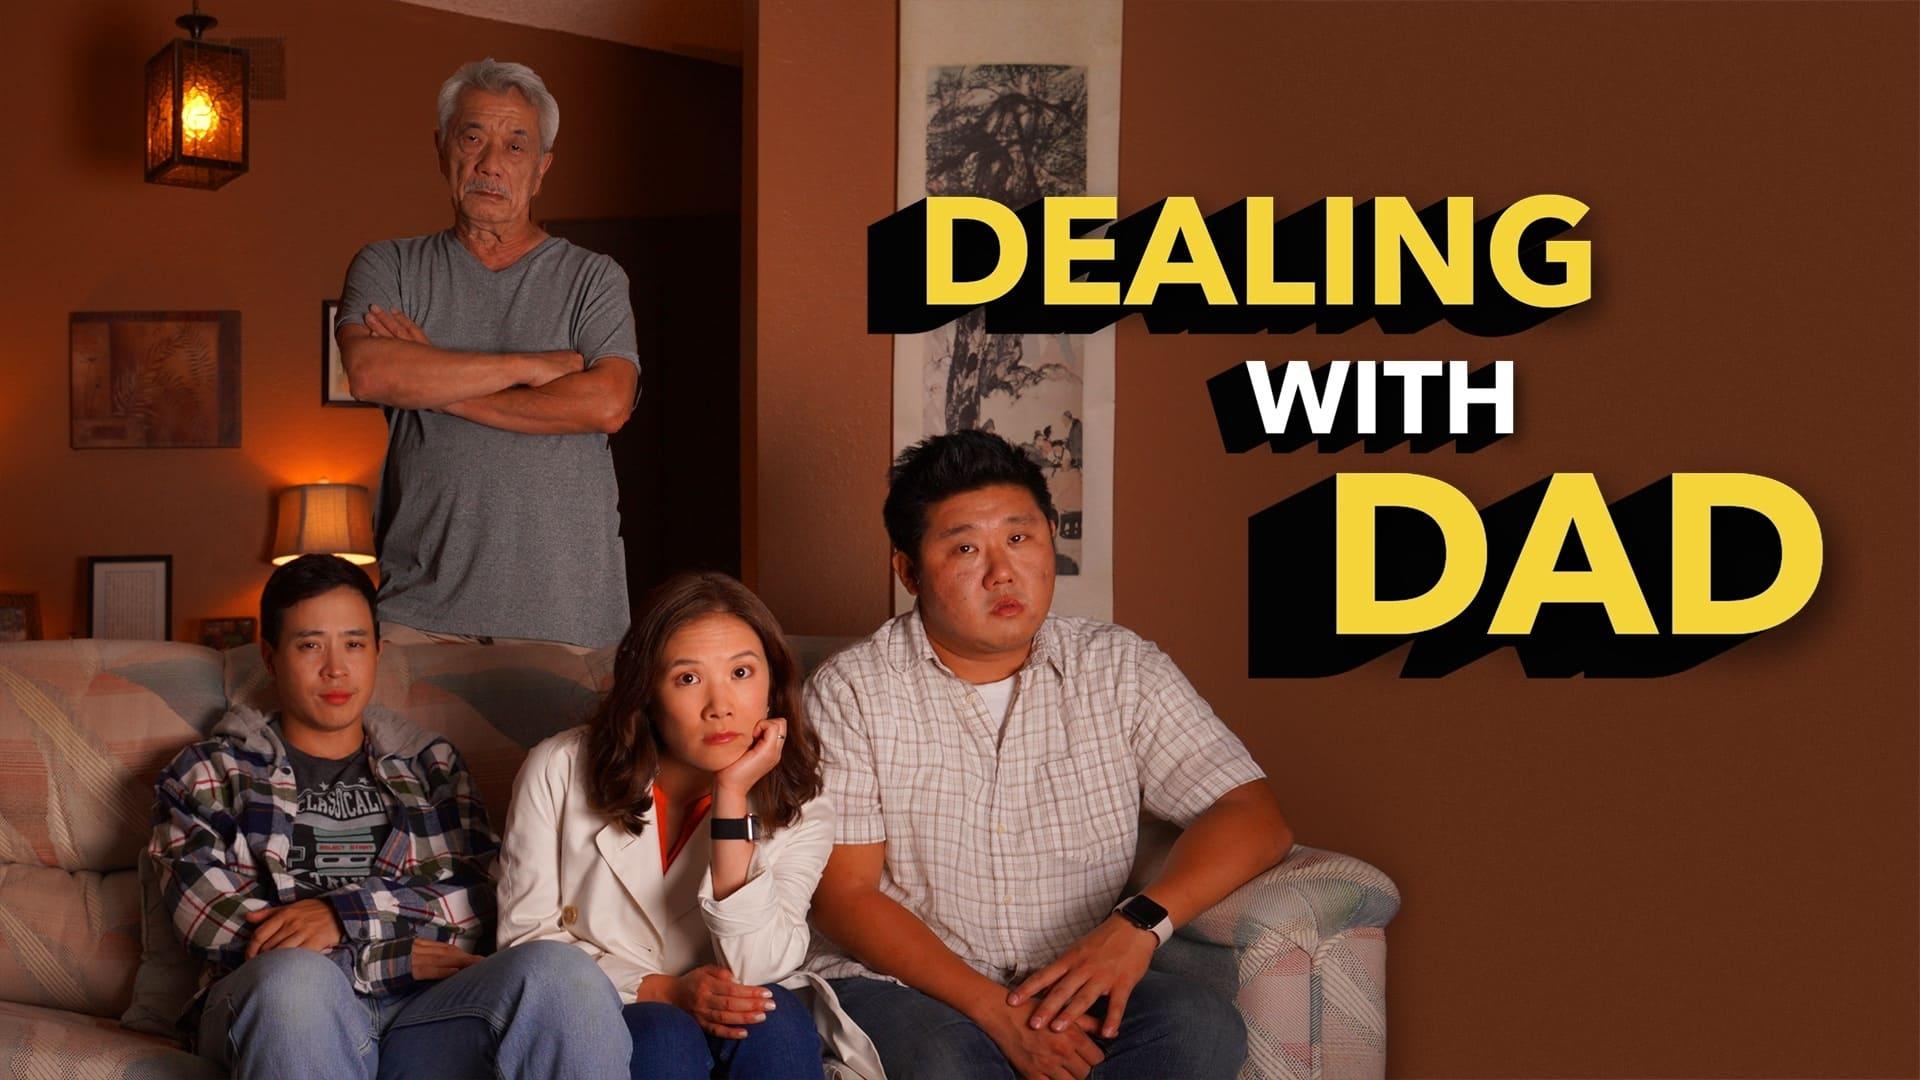 Dealing with Dad backdrop